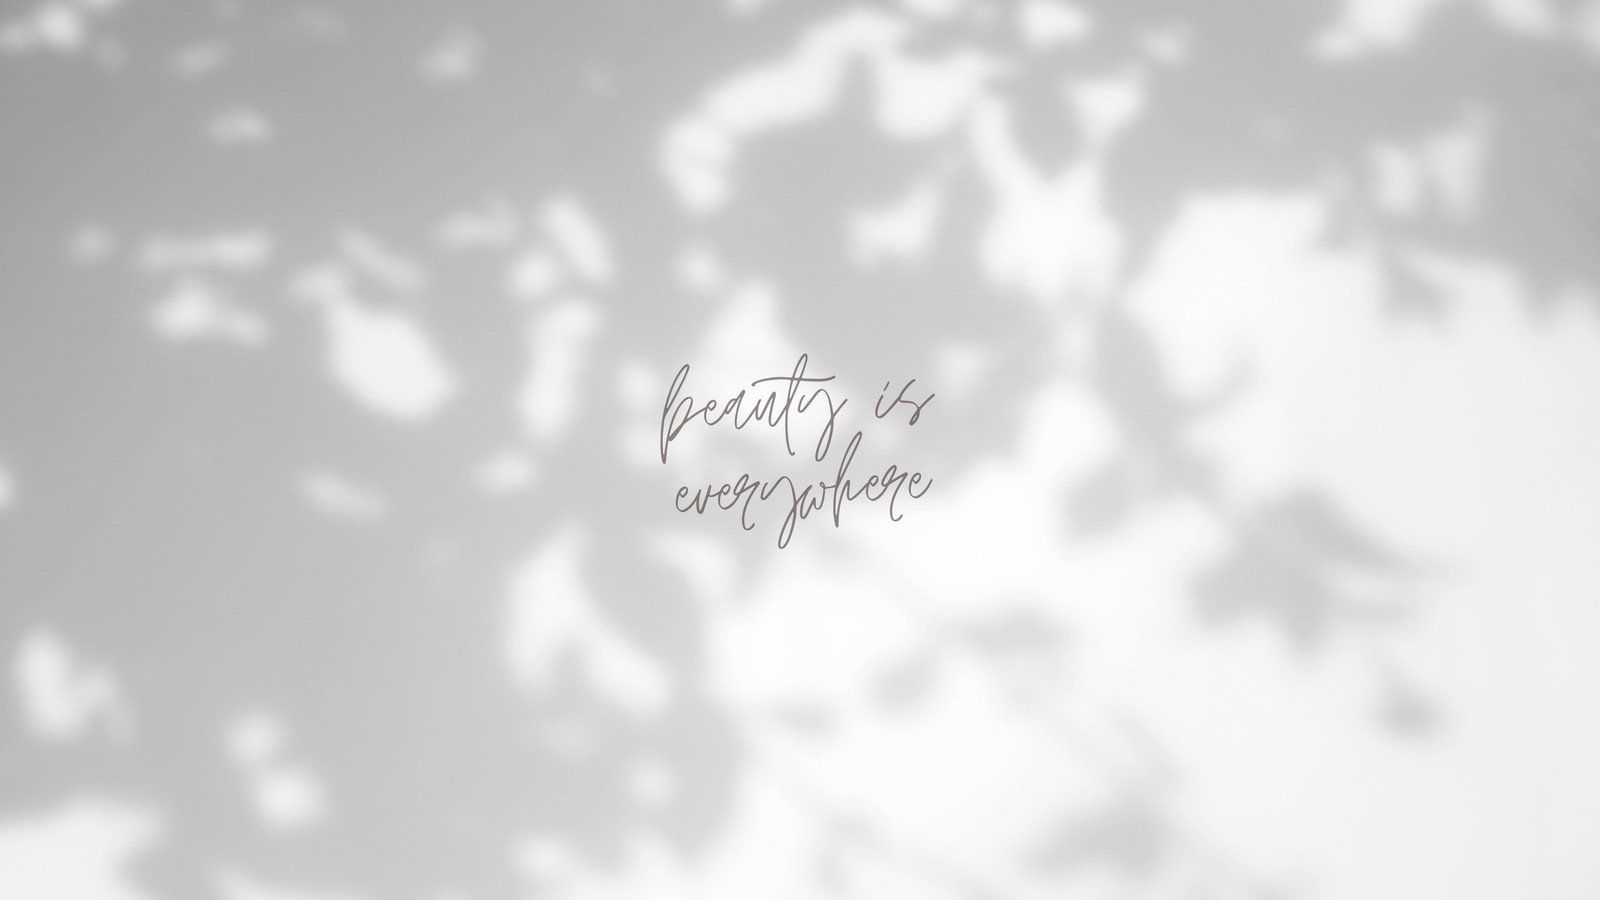 Beauty is everywhere wallpaper - white on white - Inspirational